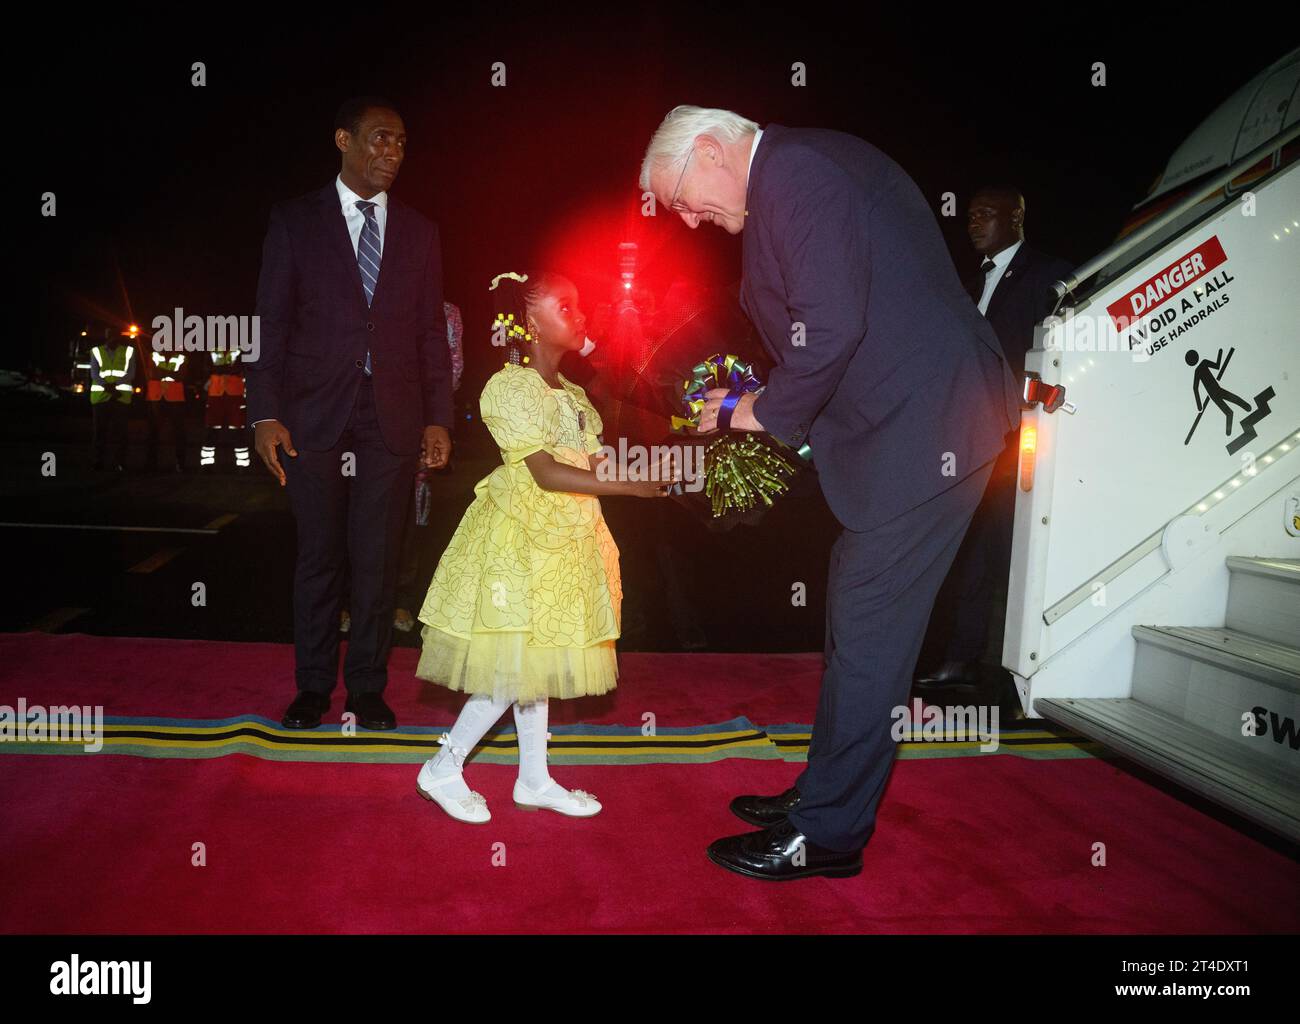 Daressalam, Tanzania. 30th Oct, 2023. German President Frank-Walter Steinmeier is greeted with flowers by a girl at Julius Nyerere International Airport in Dar es Salaam. President Steinmeier is visiting the East African countries of Tanzania and Zambia this week. Credit: Bernd von Jutrczenka/dpa/Alamy Live News Stock Photo